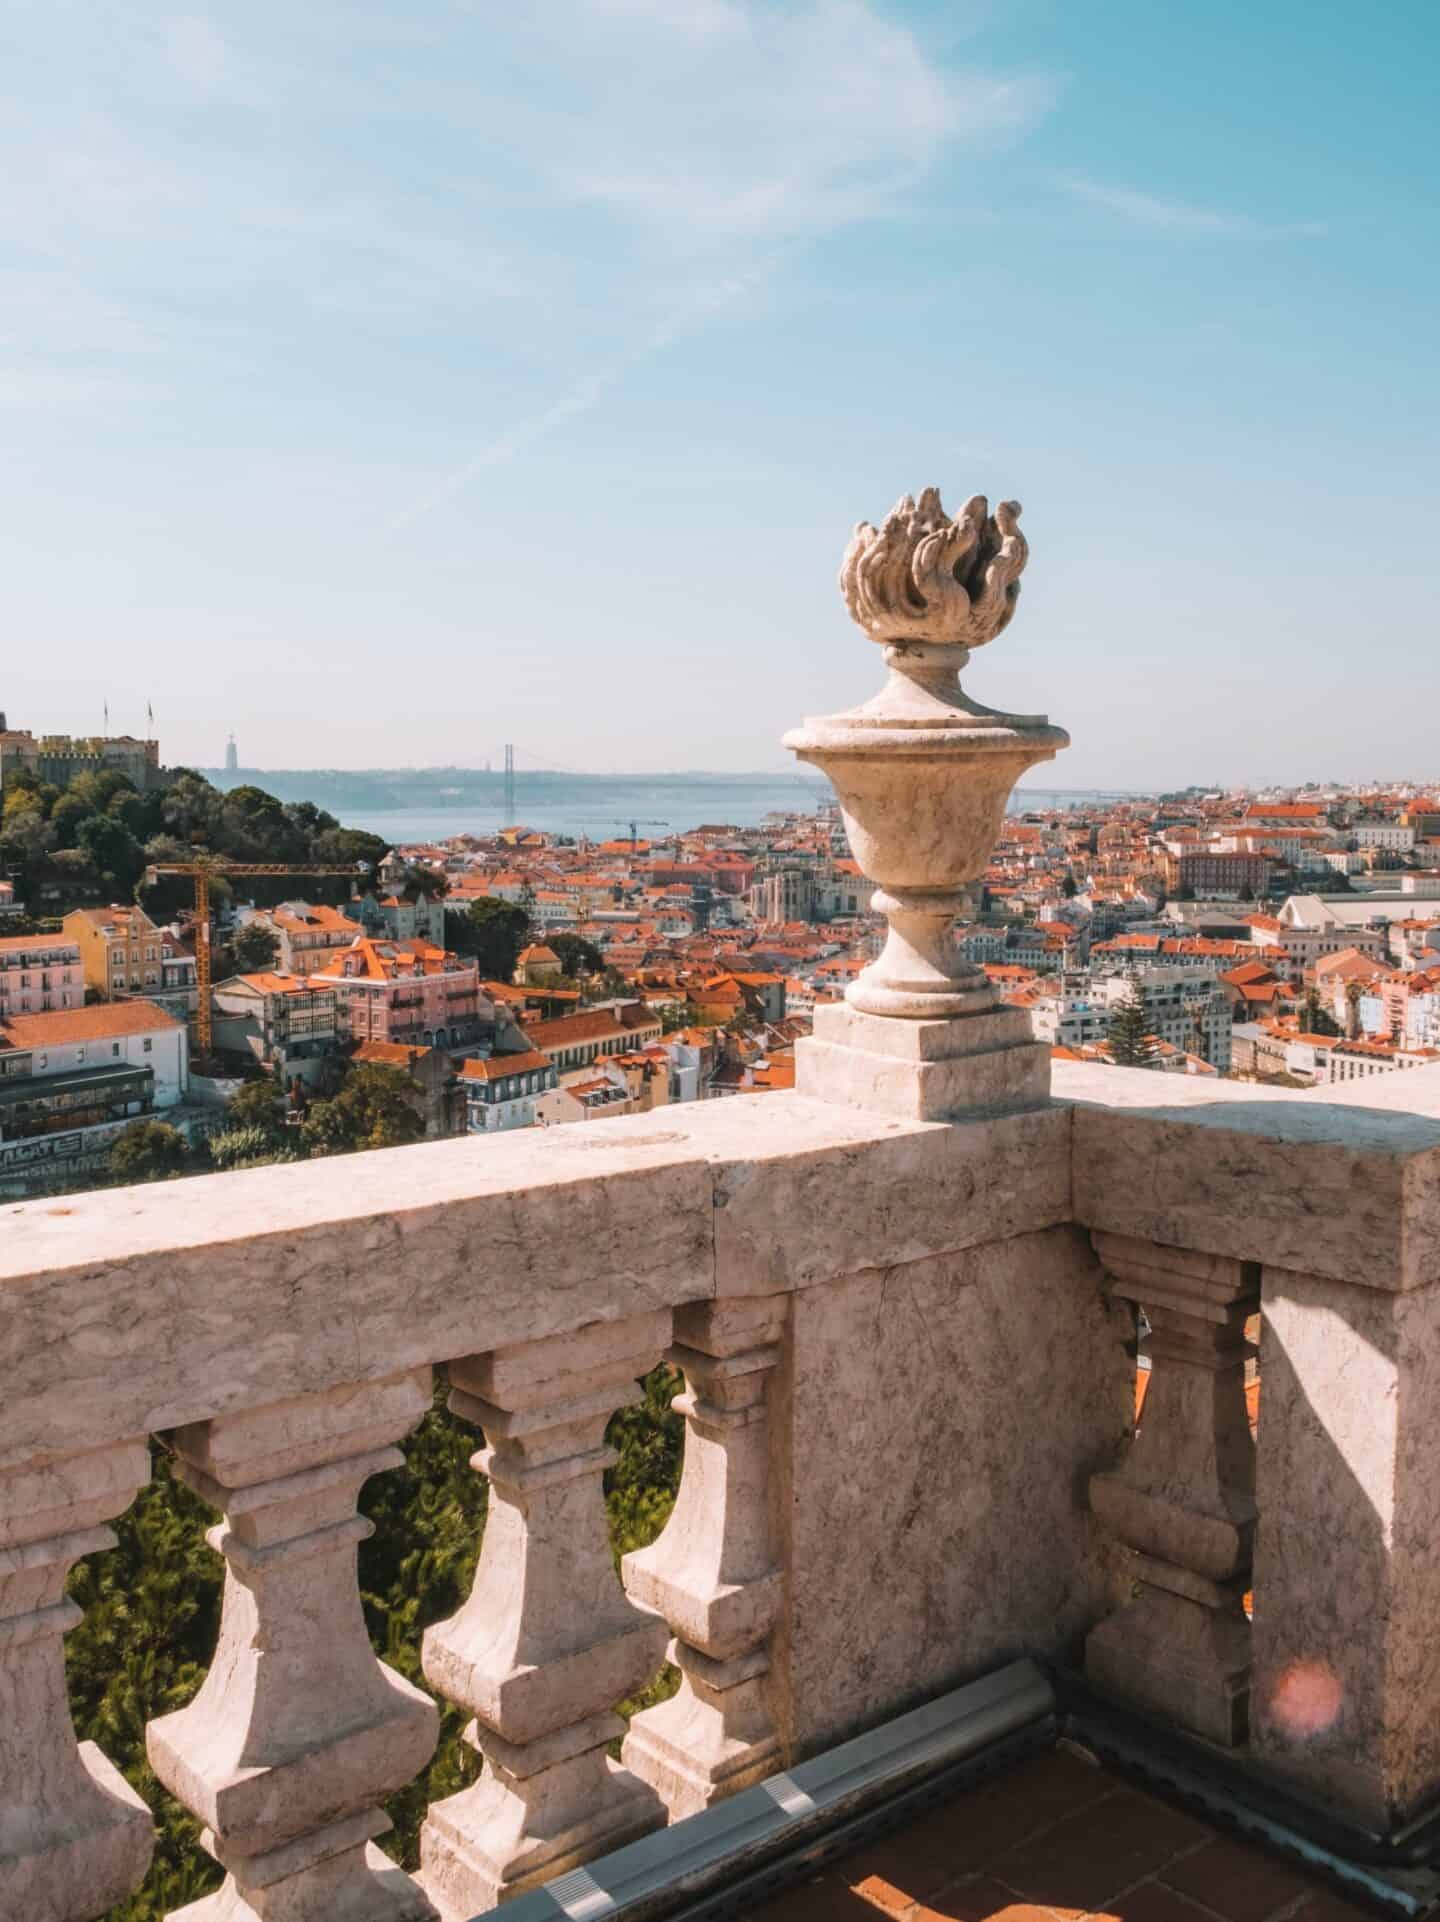 Views from the rooftop of The Church of Our Lady of Grace in Lisbon. 